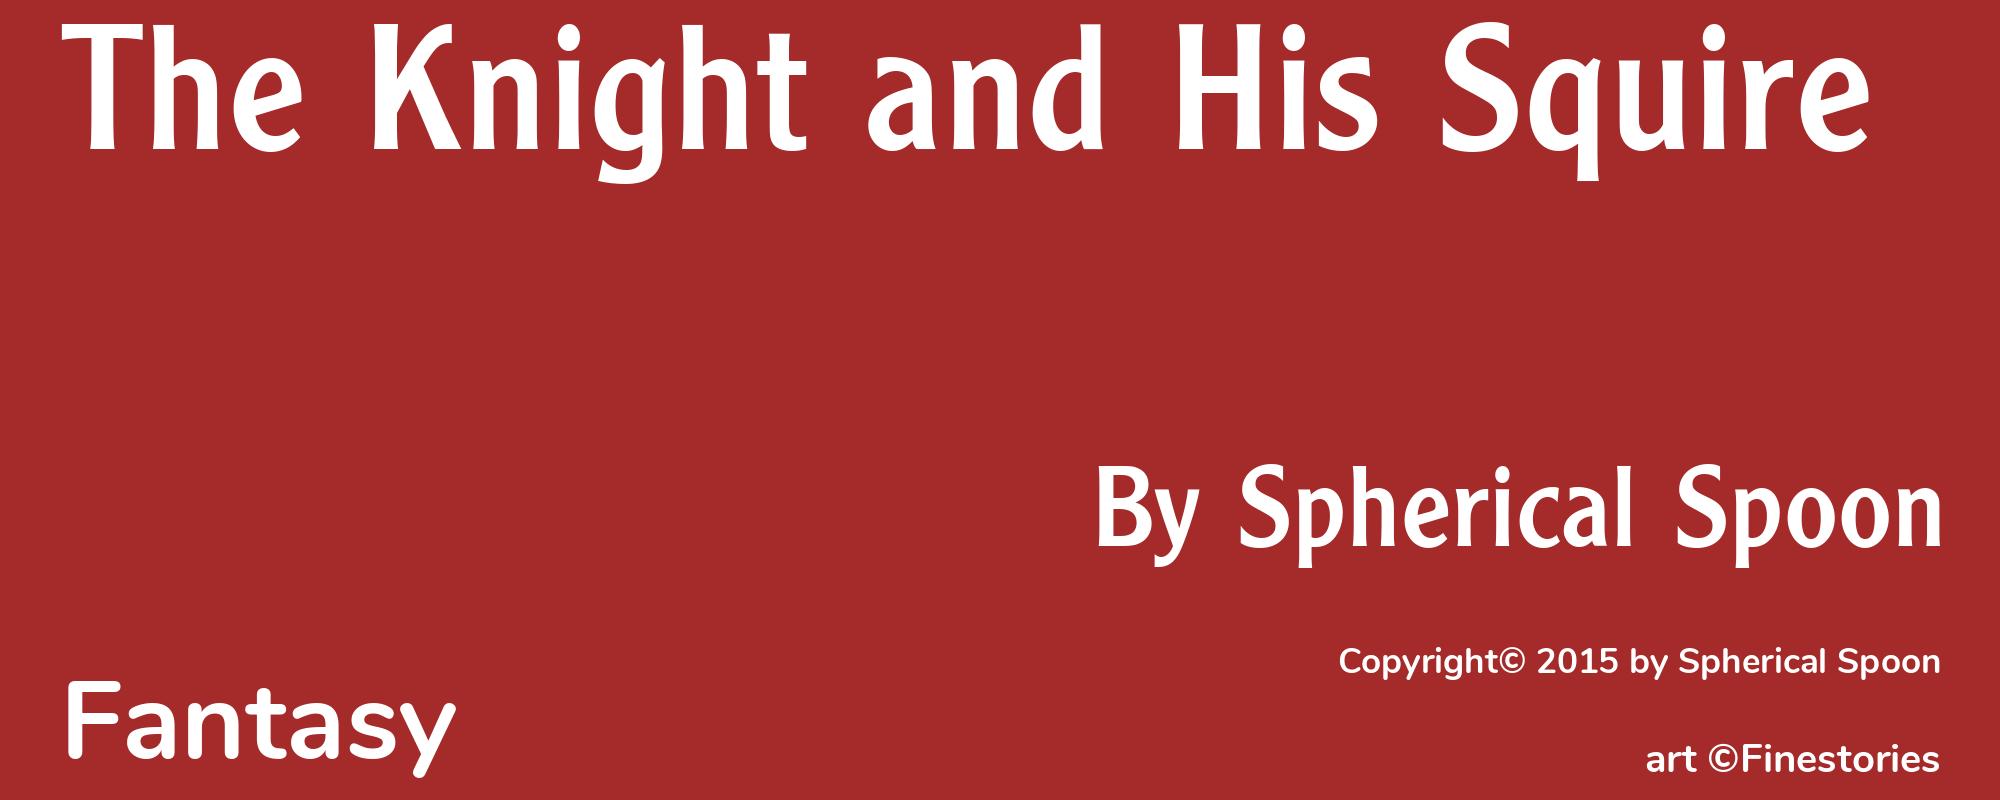 The Knight and His Squire - Cover